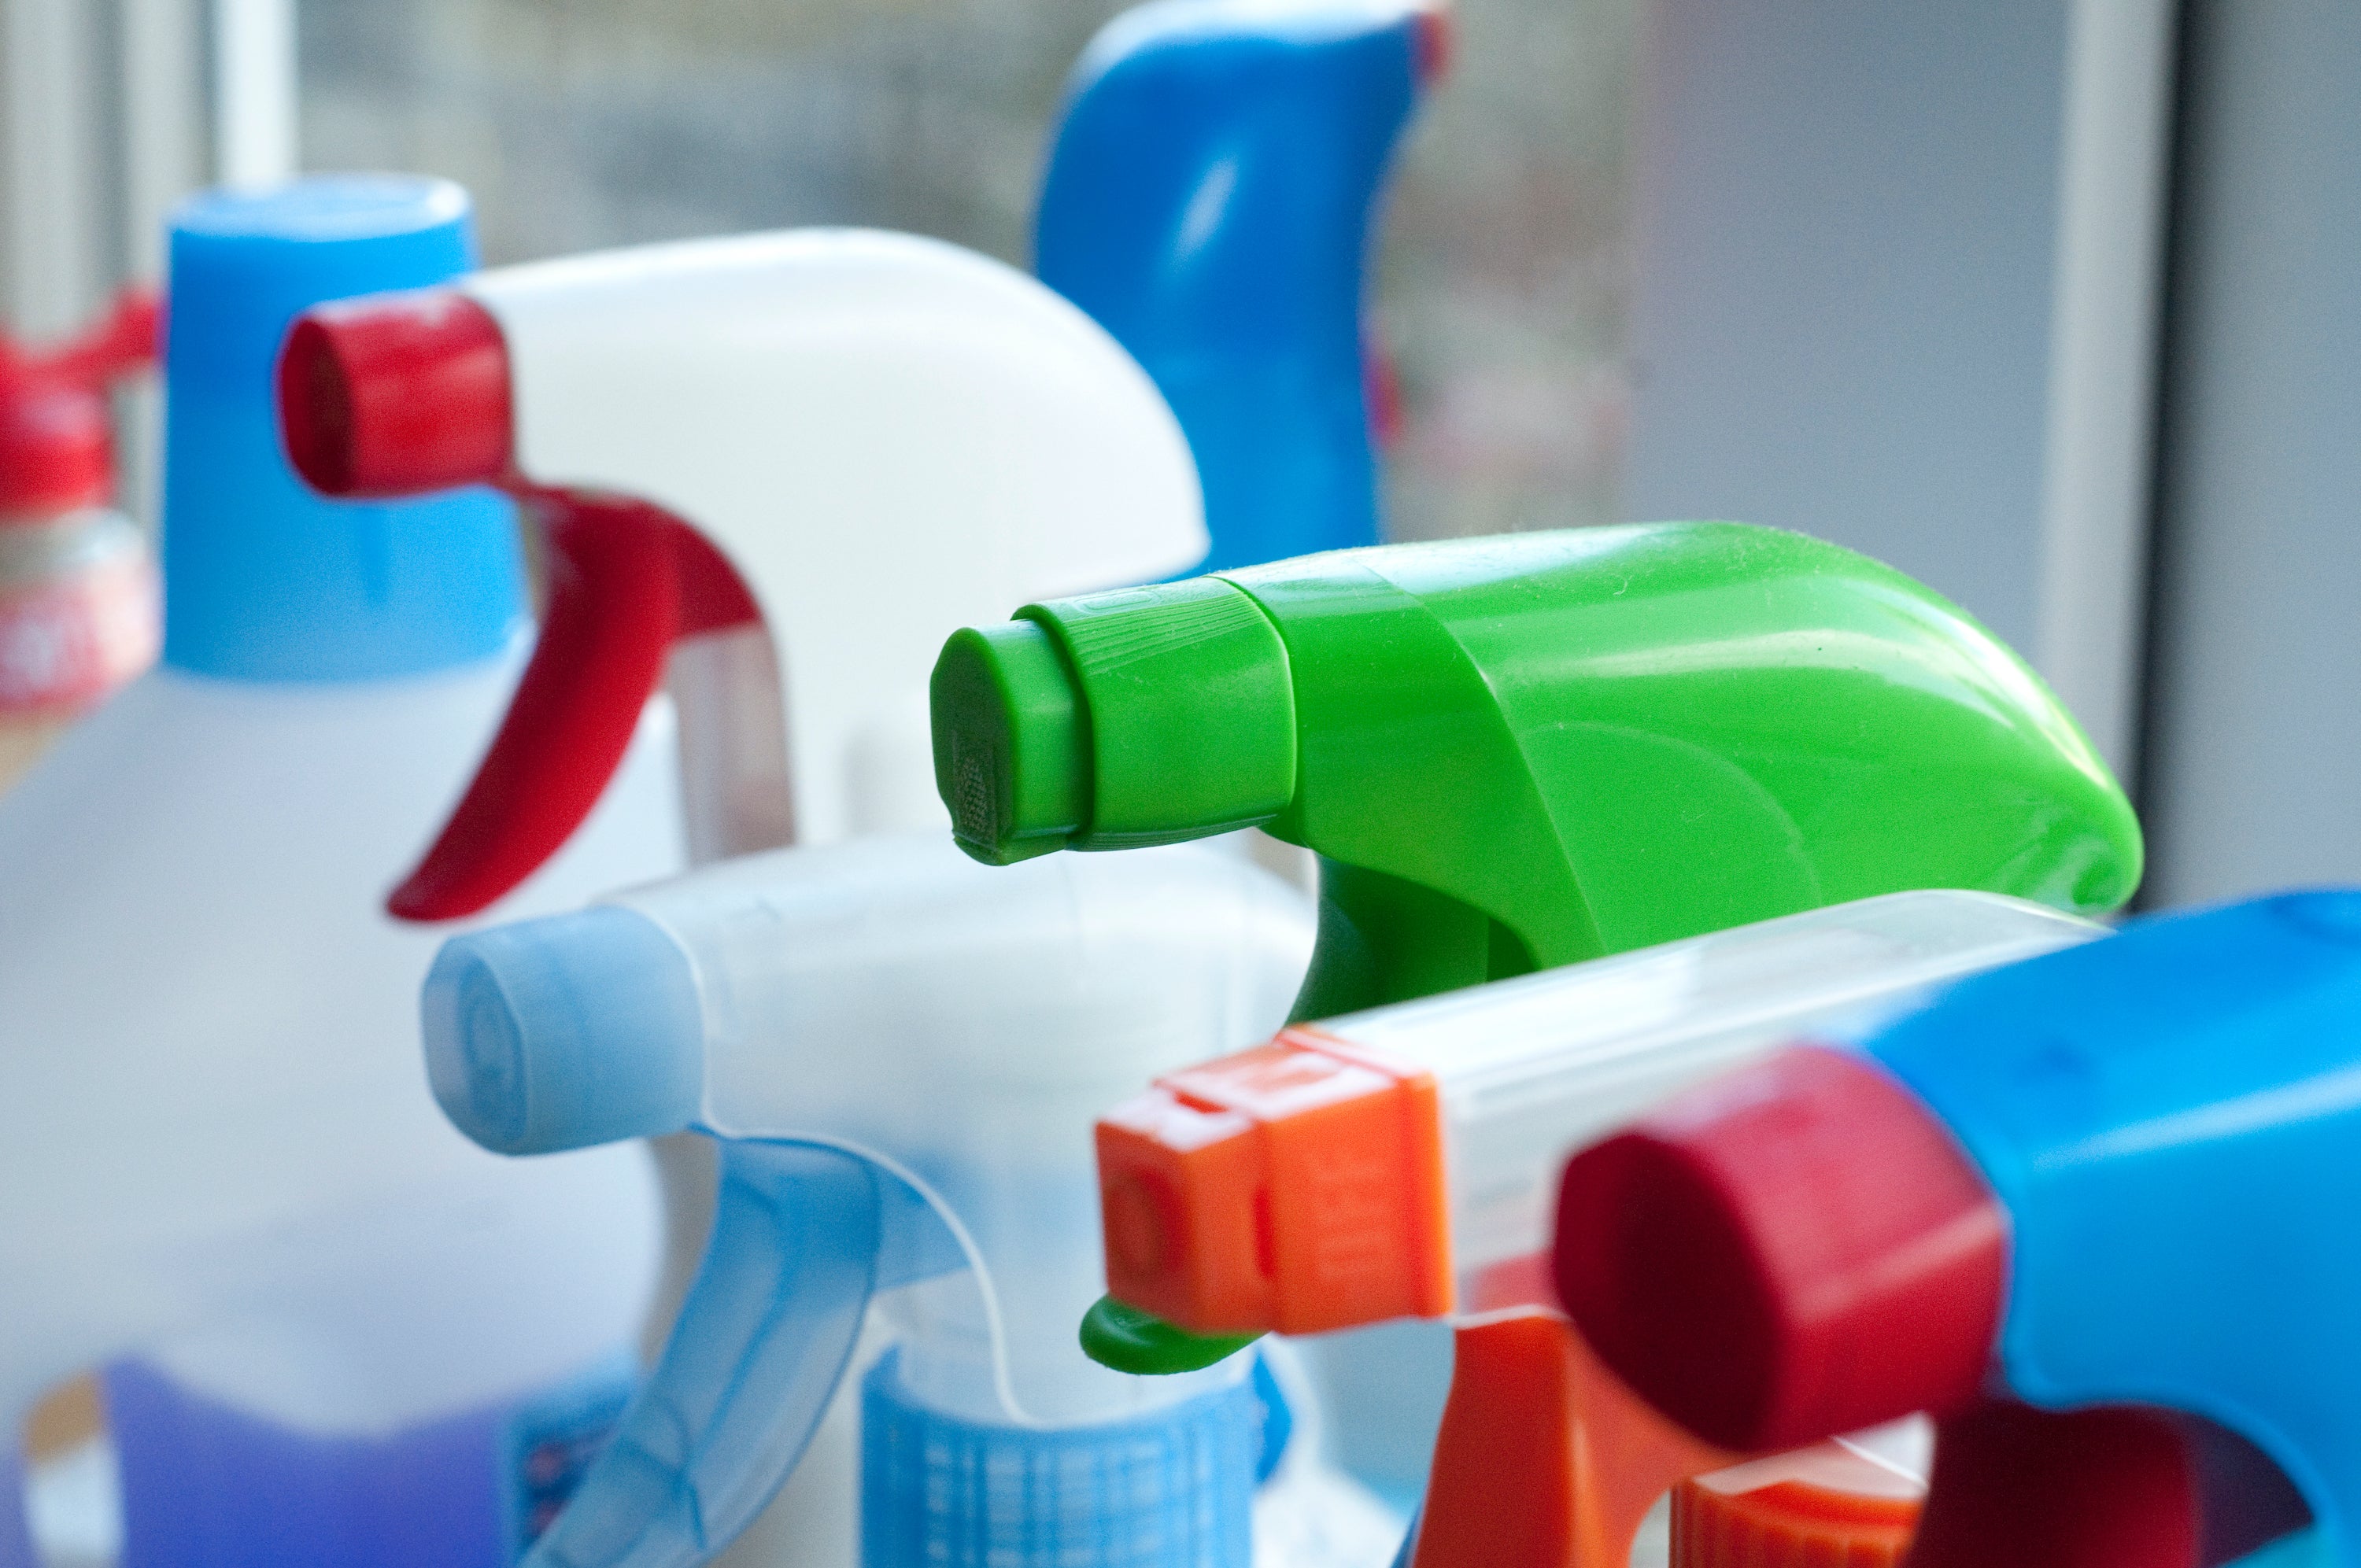 Cleaning solutions in spray bottles